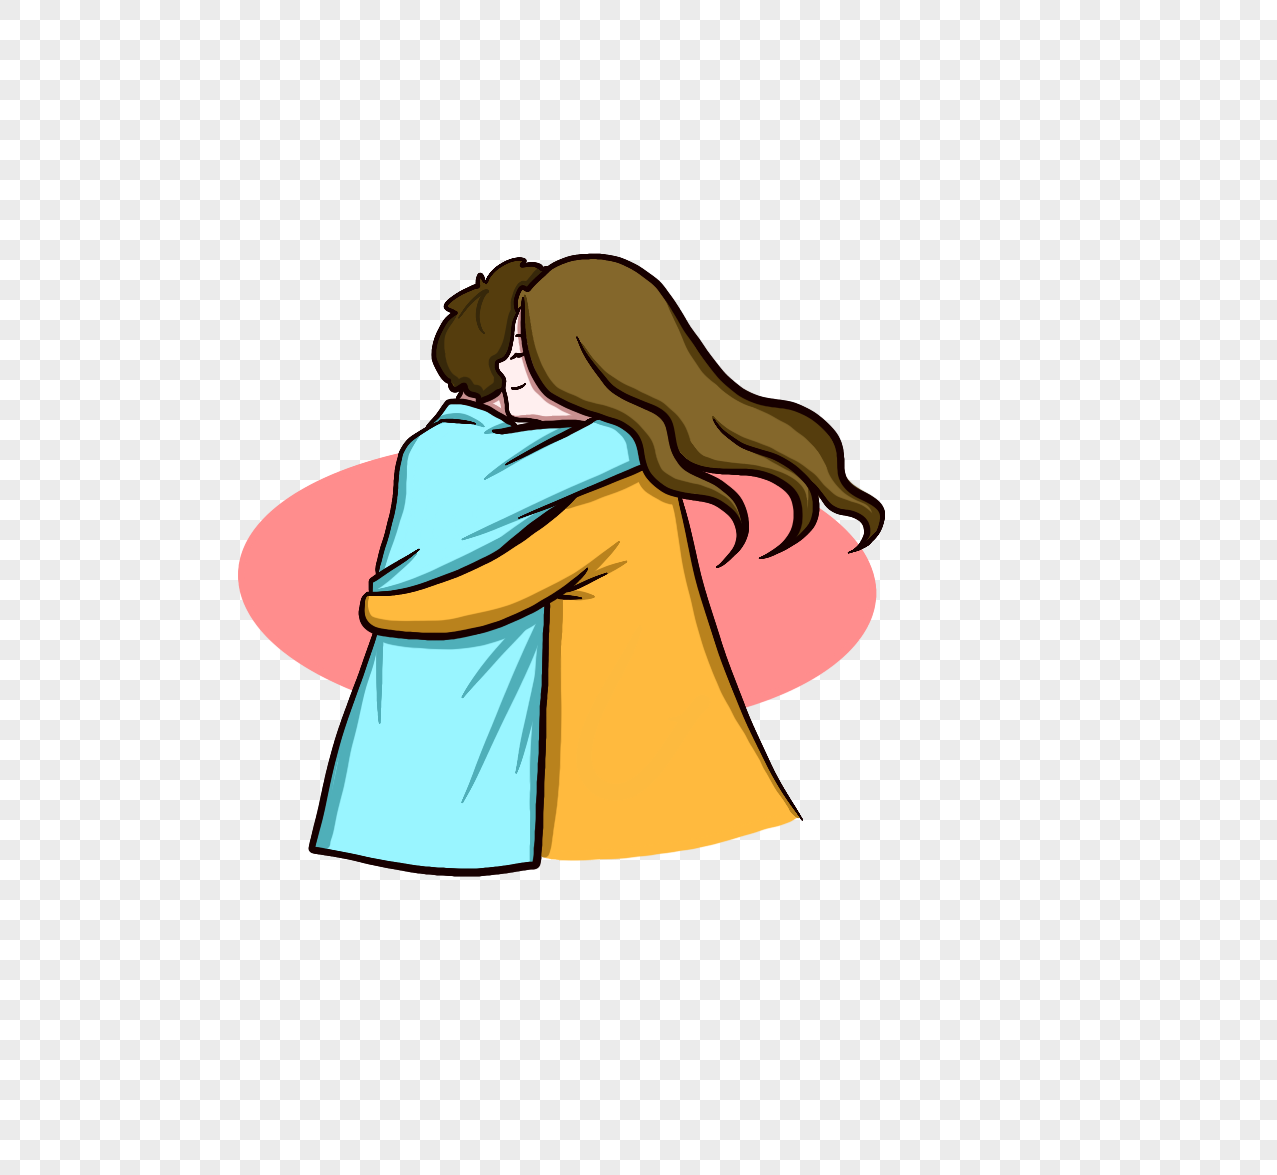 Cartoon hand drawn happy couple sweet hug png image_picture free ...